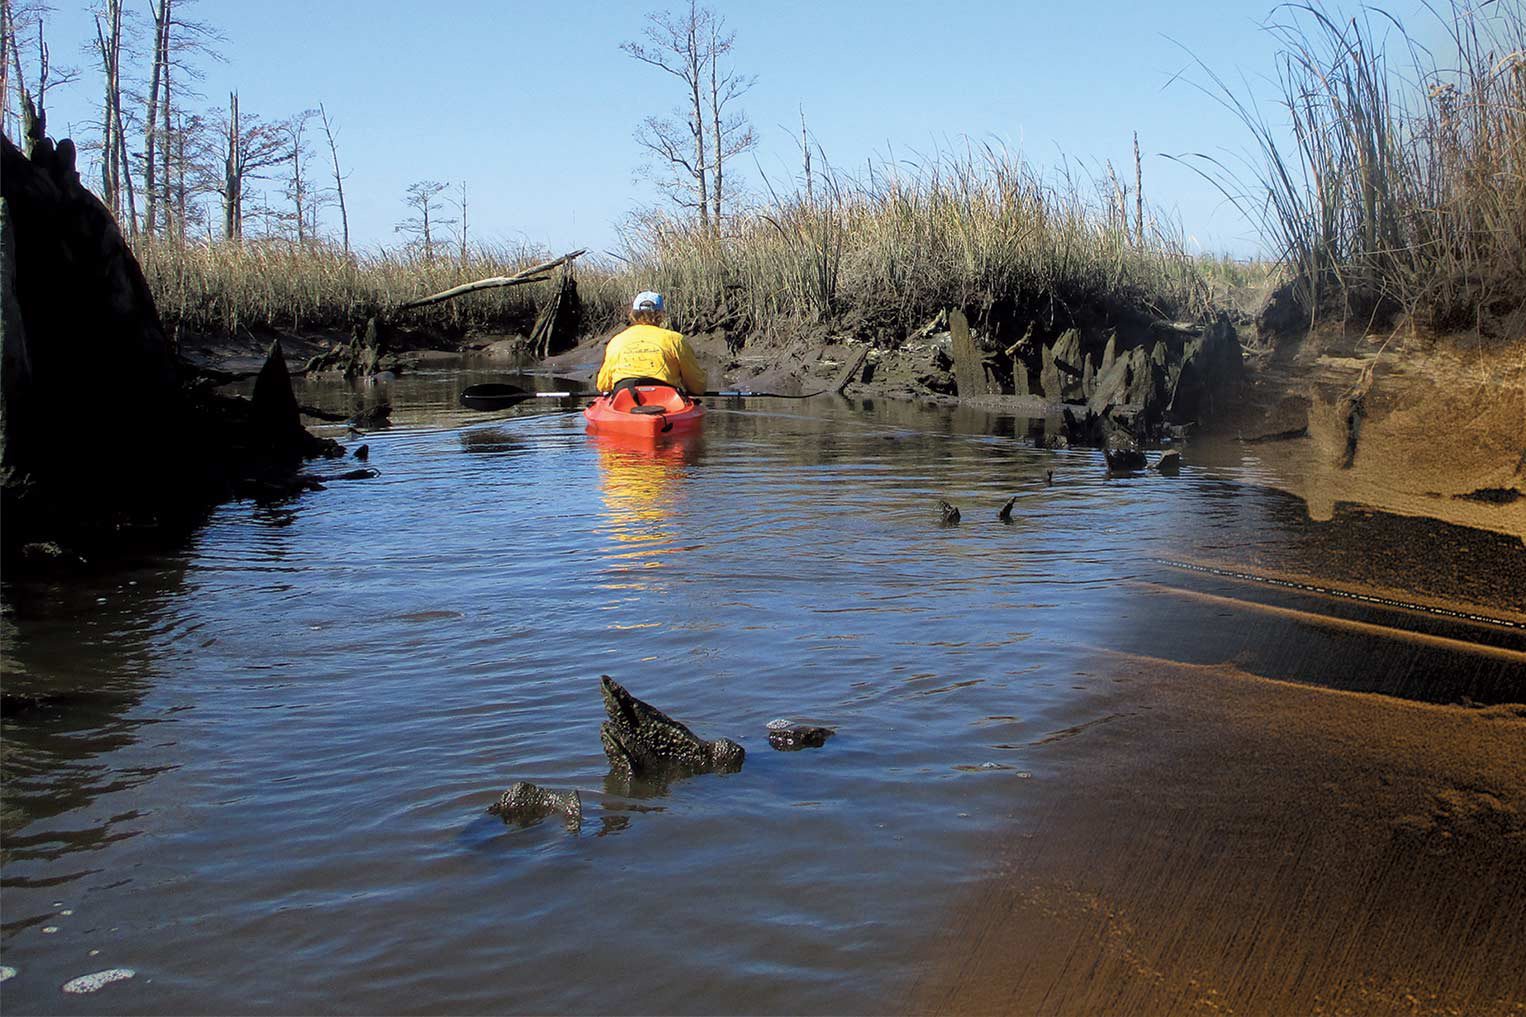 Using side-scan sonar and positioning systems, researchers search for archaeological evidence of the rice fields once situated along the banks of the lower Cape Fear and Brunswick rivers. The far right of the image is a sonar overlay of the riverbed.